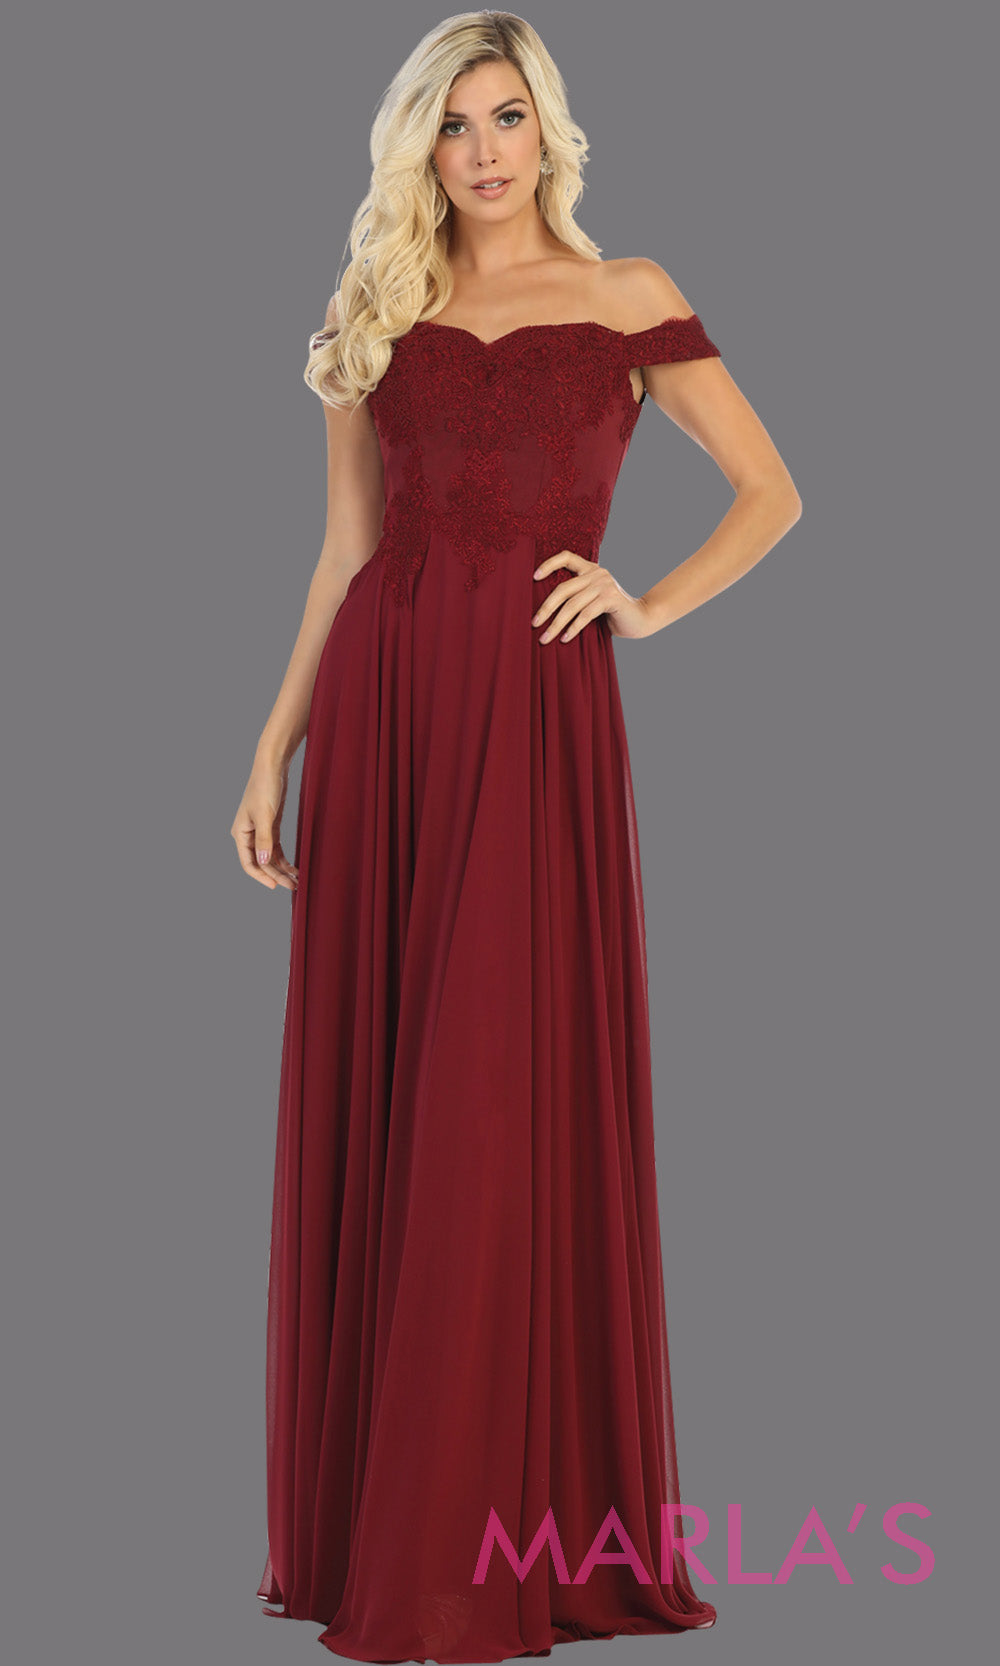 Long flowy burgundy off shoulder dress with lace top from mayqueen. Dark red evening gown is perfect for bridesmaids, simple wedding guest dress, formal party, plus size wedding guest dress, modest gown, indowestern gown, mother of the bride